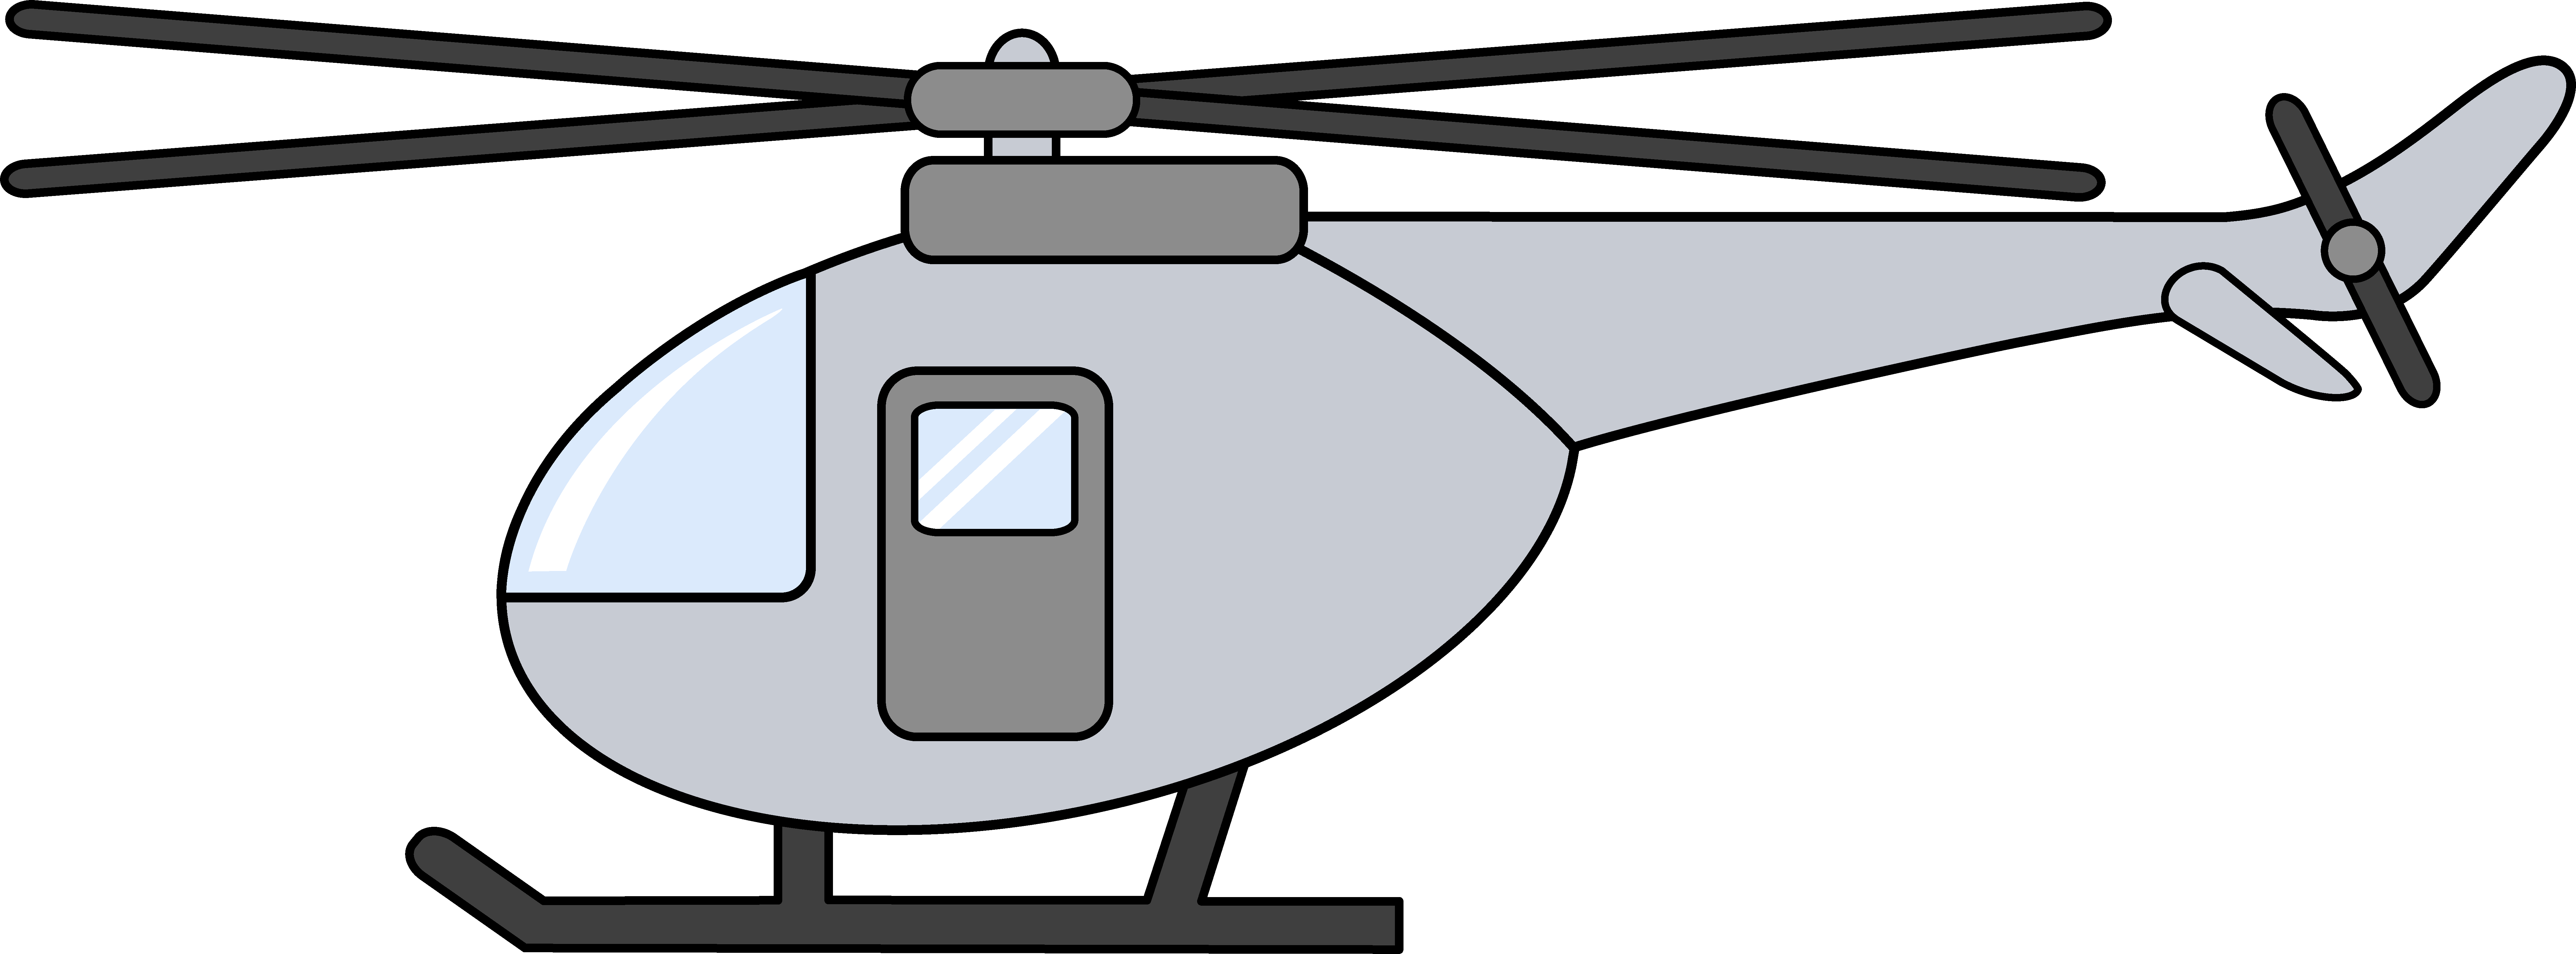 Free Helicopter Cliparts, Download Free Clip Art, Free Clip.